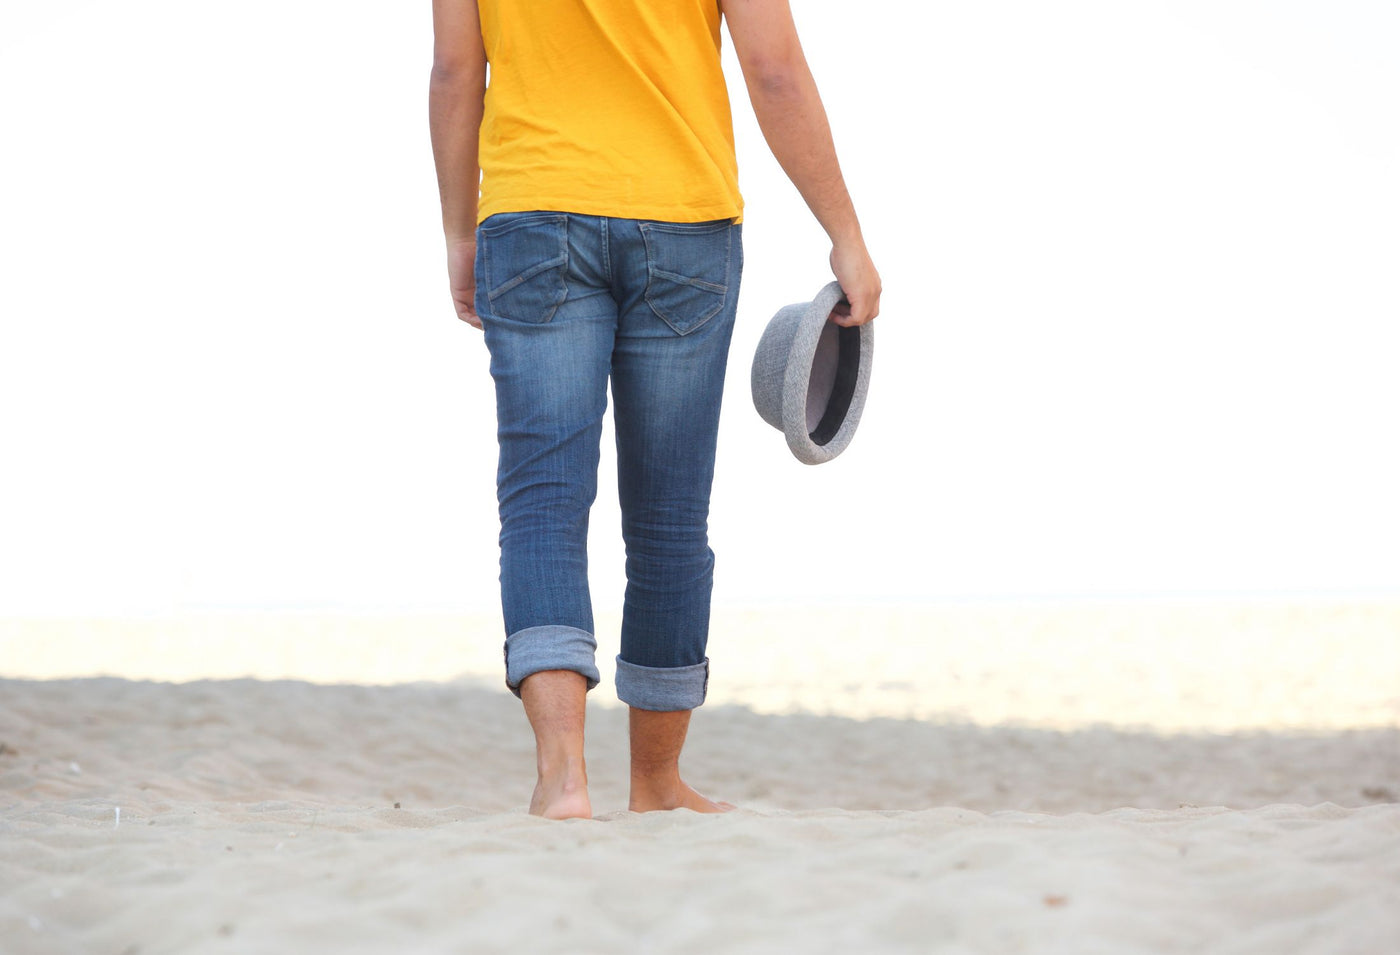 Person walking barefoot on the beach to improve their flat feet. They're wearing a yellow top and blue jeans. 